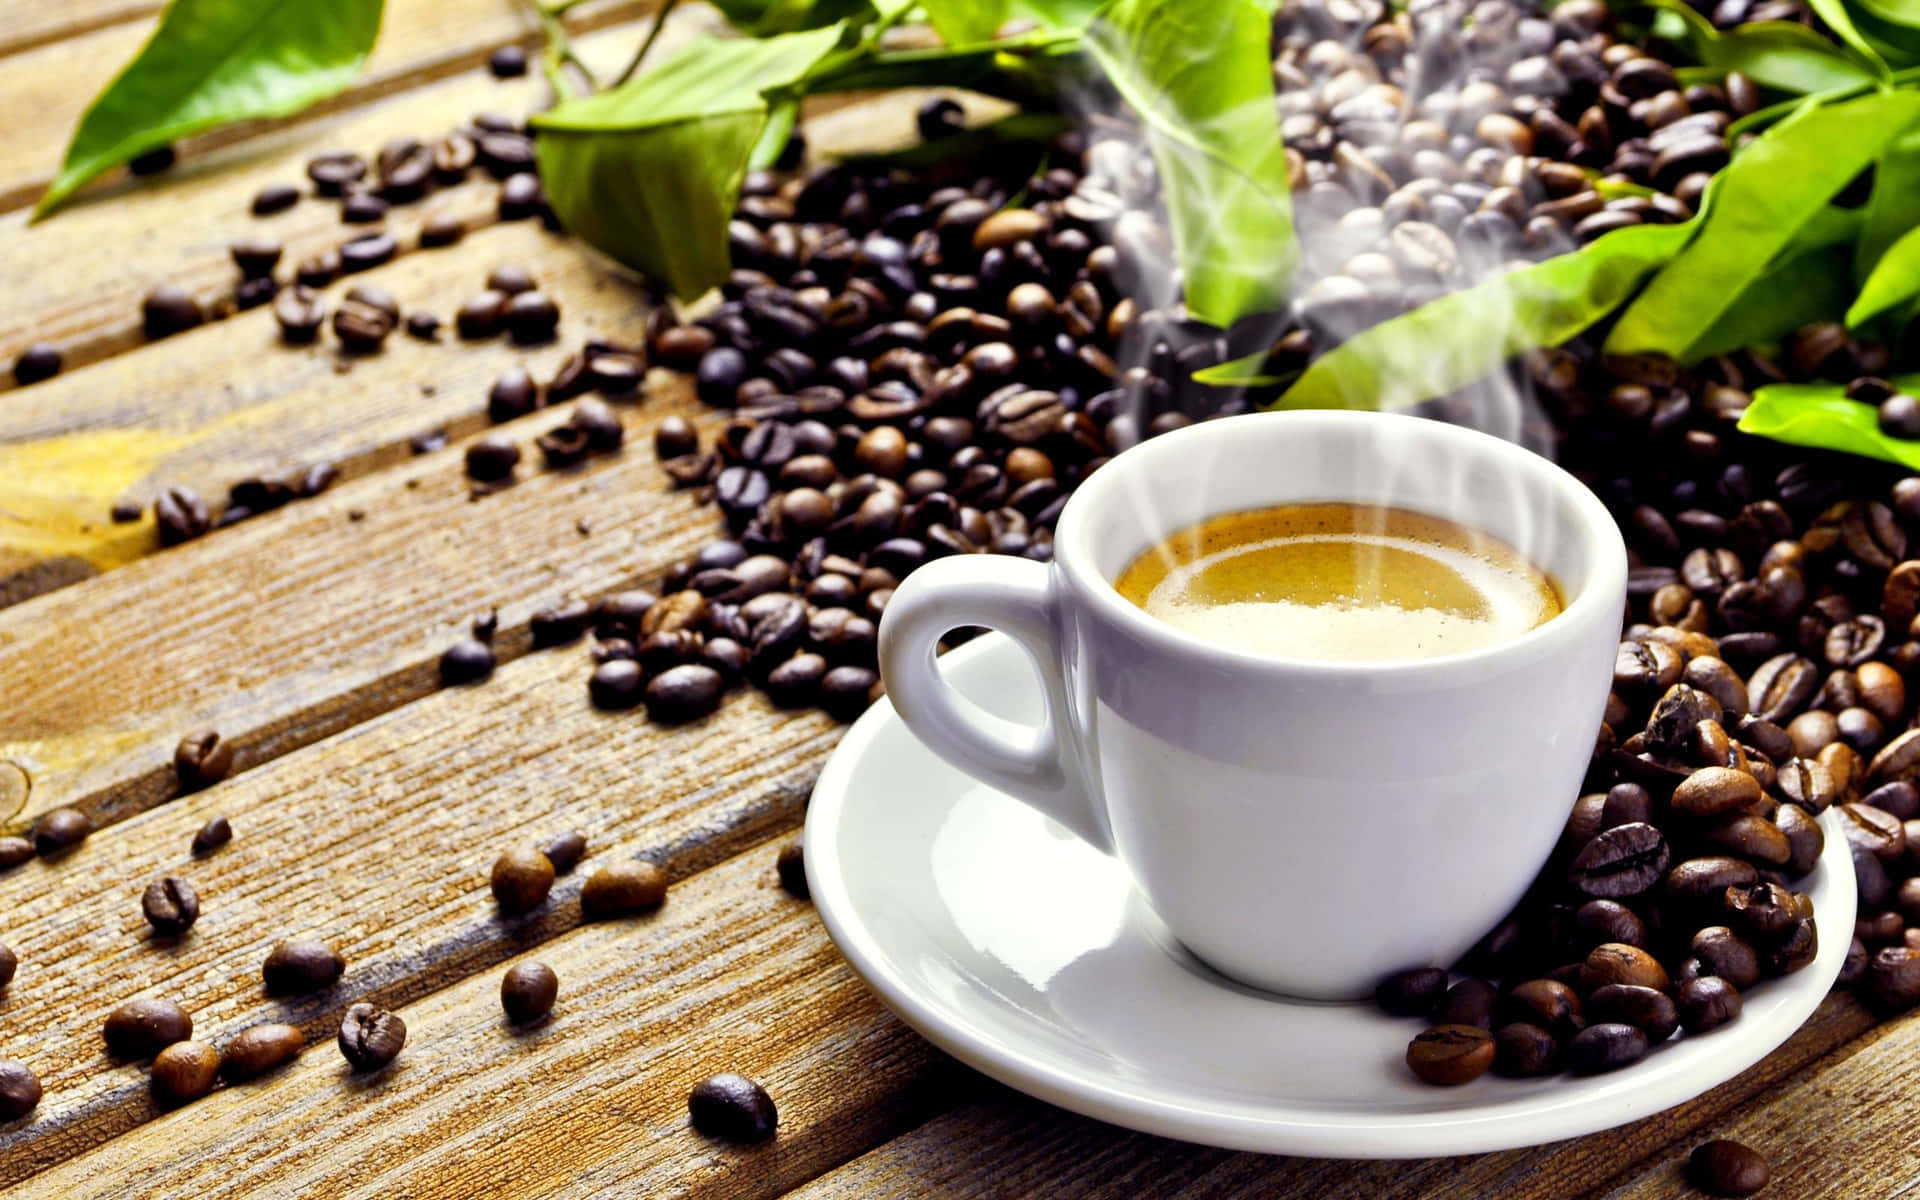 "Fill up your morning with the aroma of freshly brewed coffee"